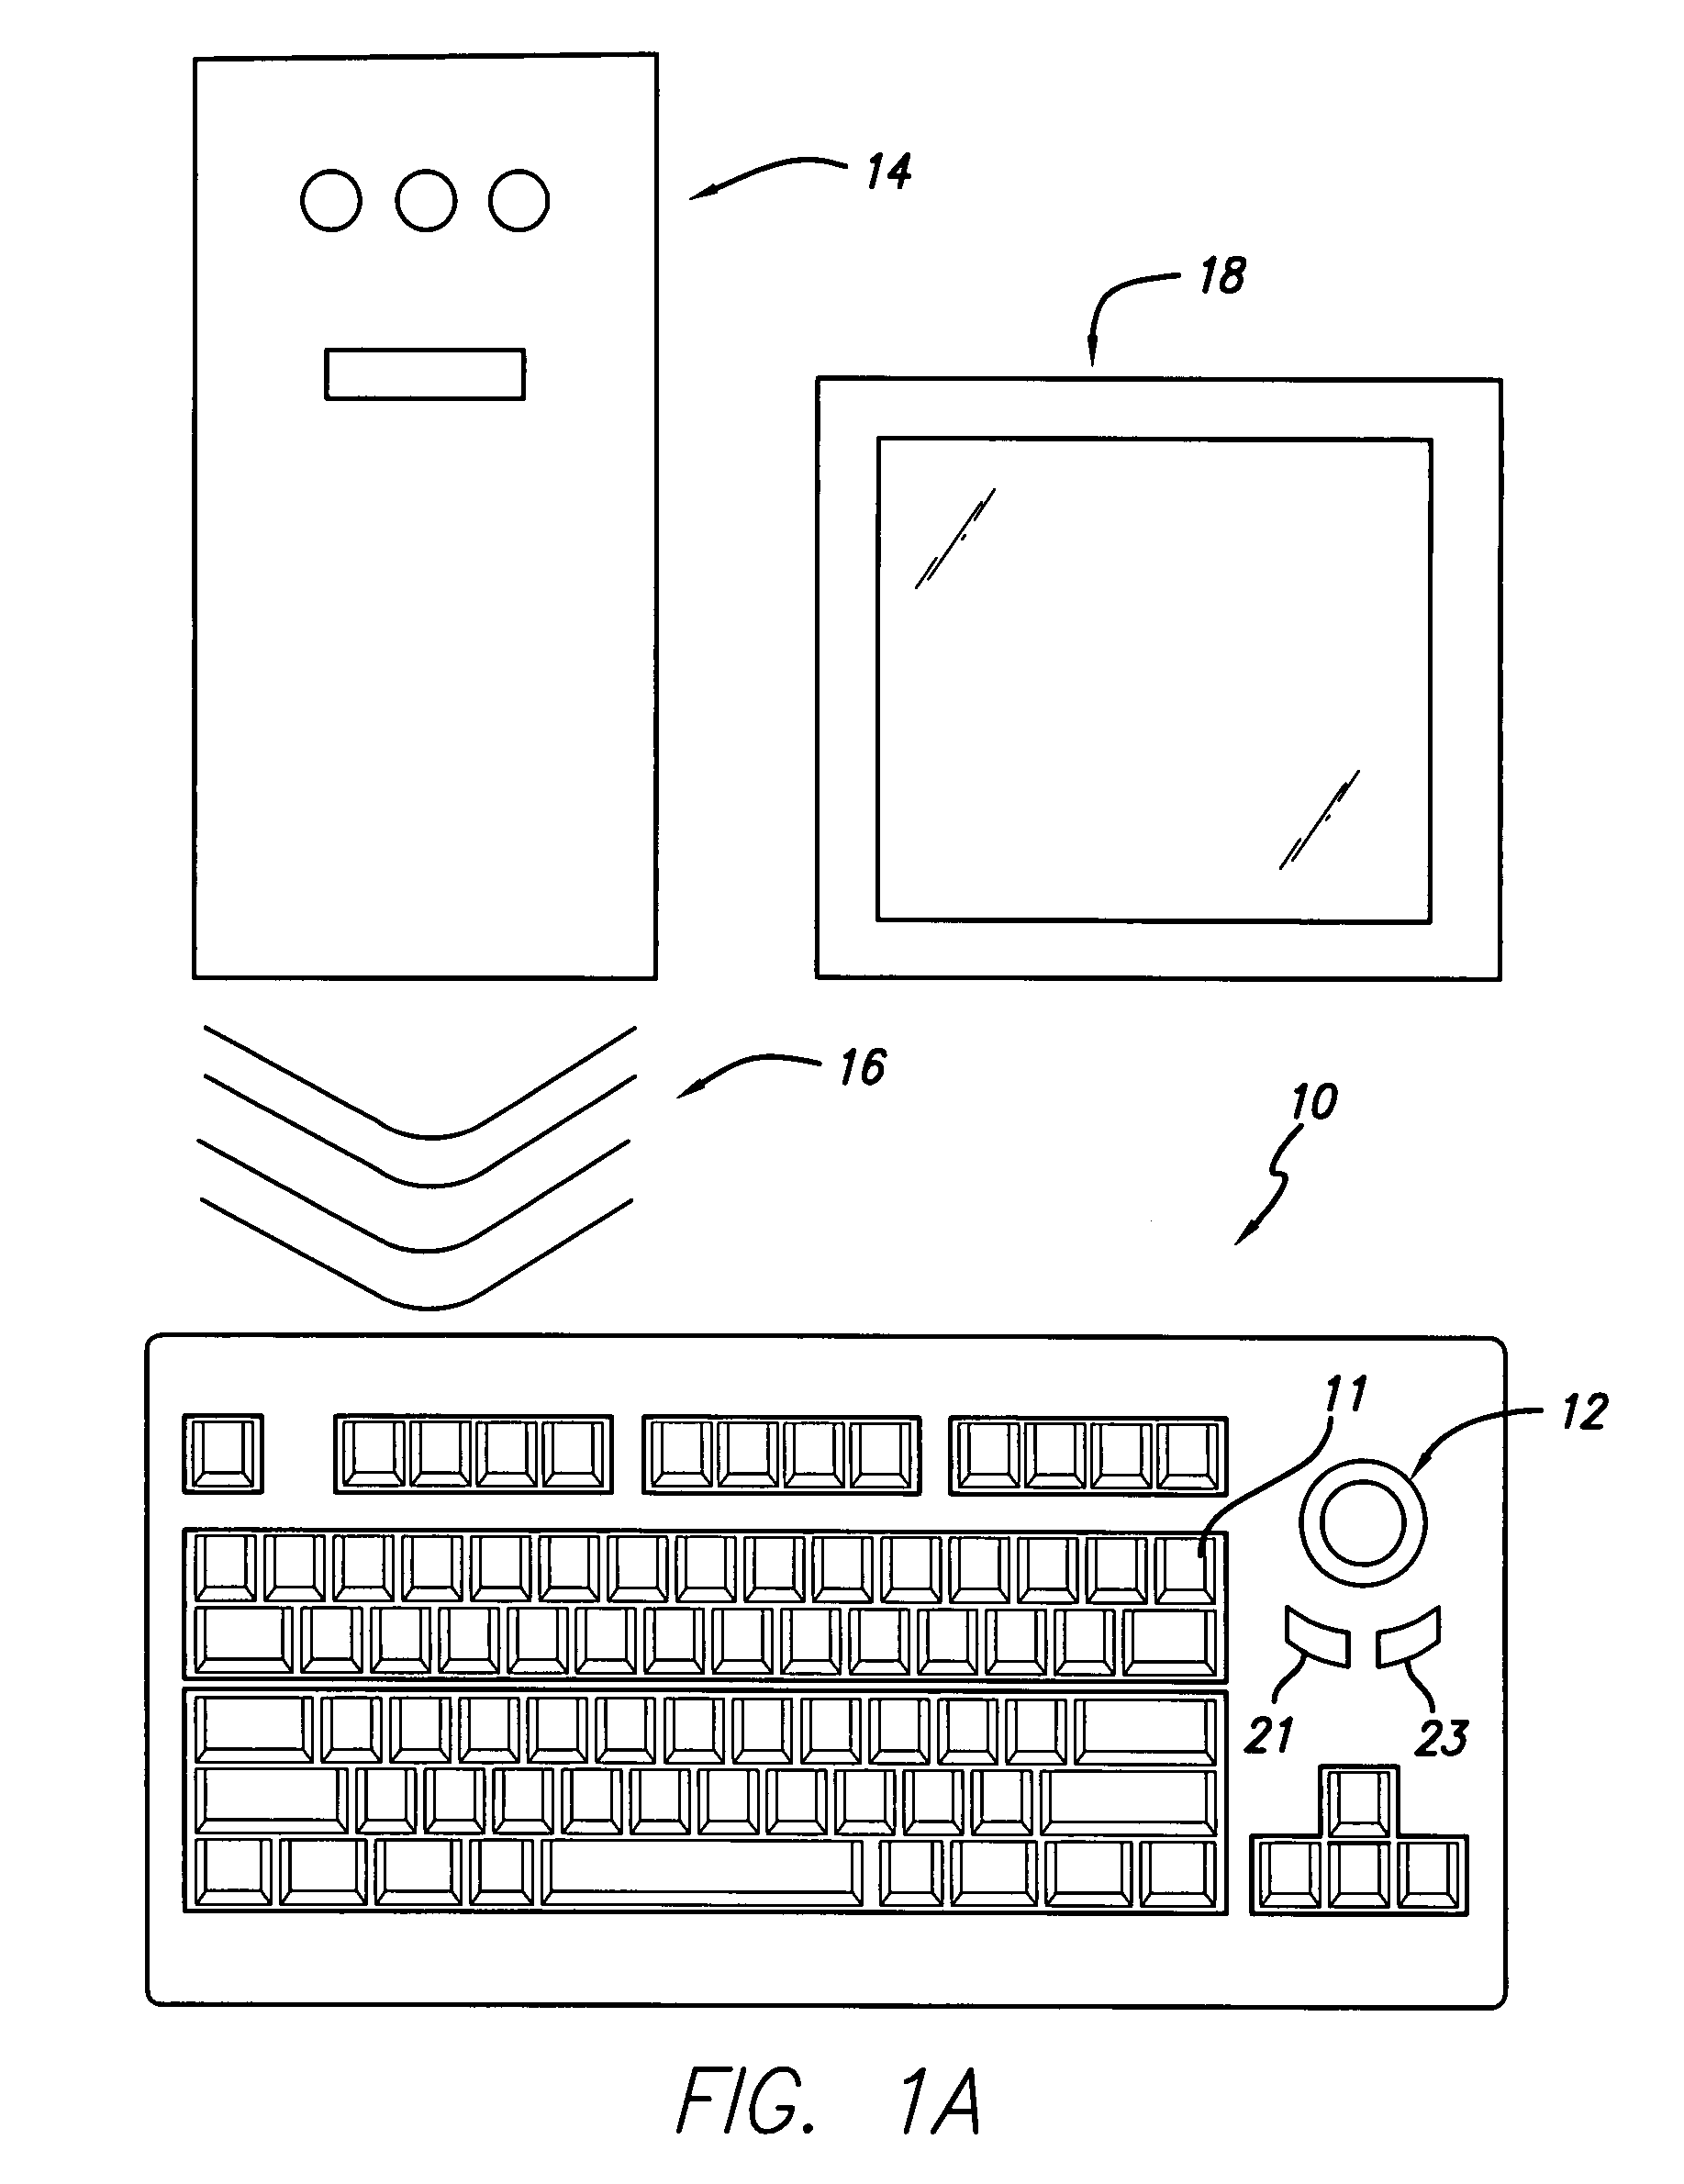 Passive wireless keyboard powered by key activation